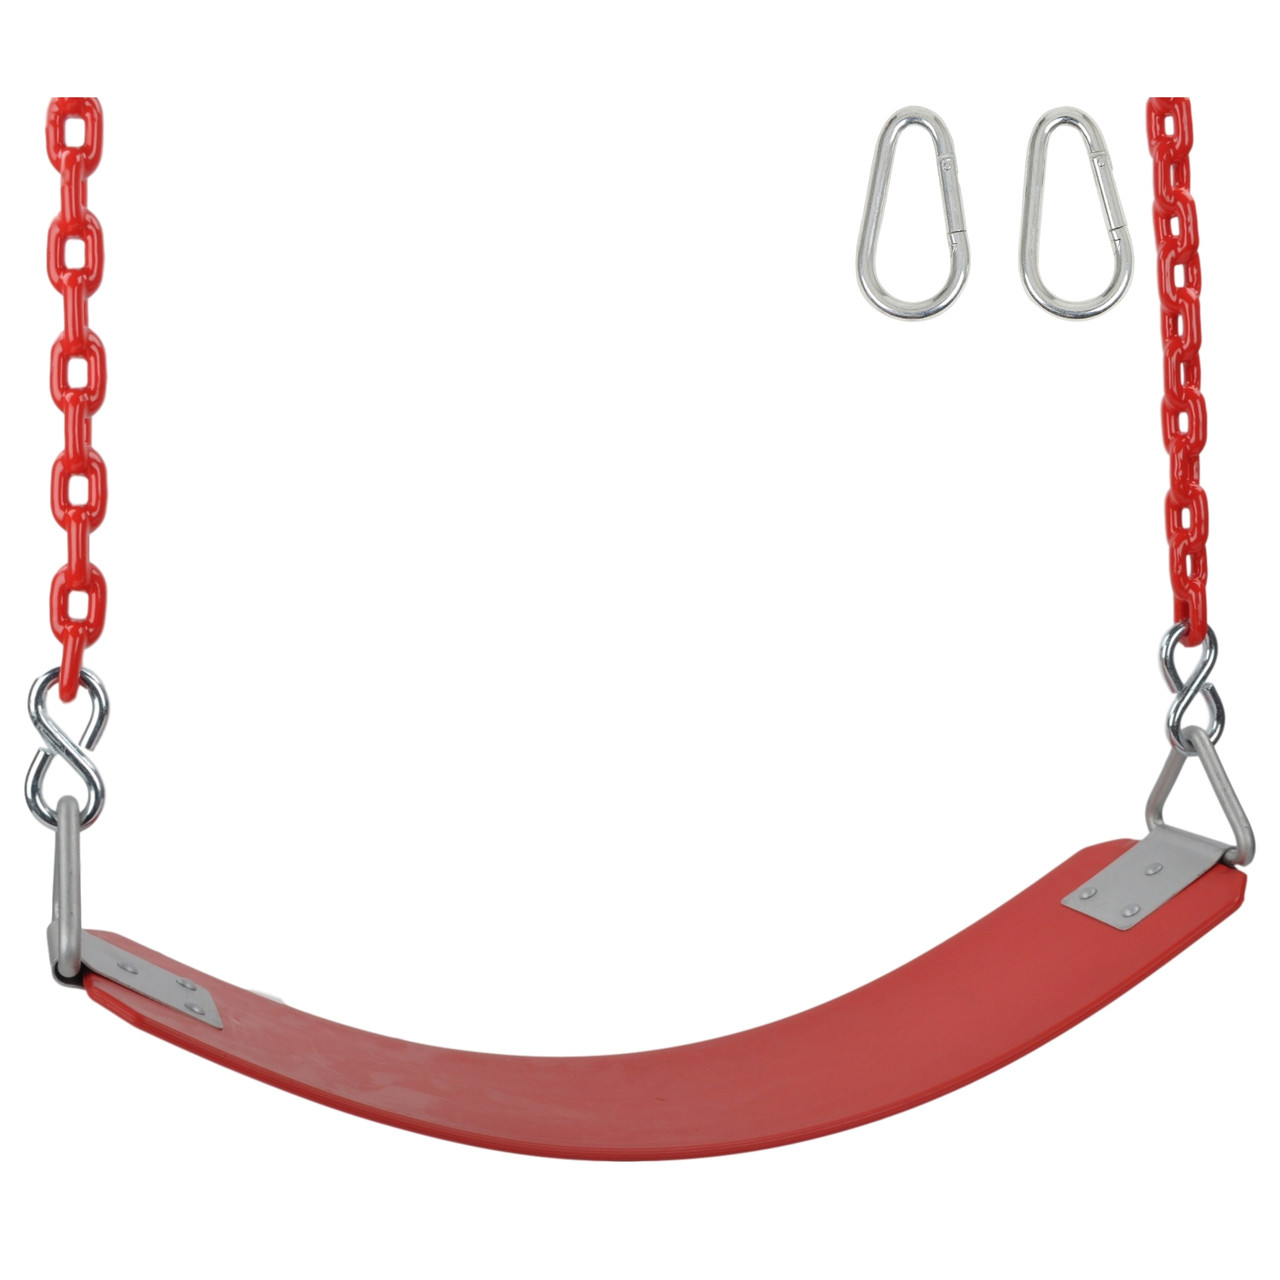 Yell Details about   Swing Set Stuff Inc Coated Chain Commercial Rubber Belt Seat with 8.5 Ft 